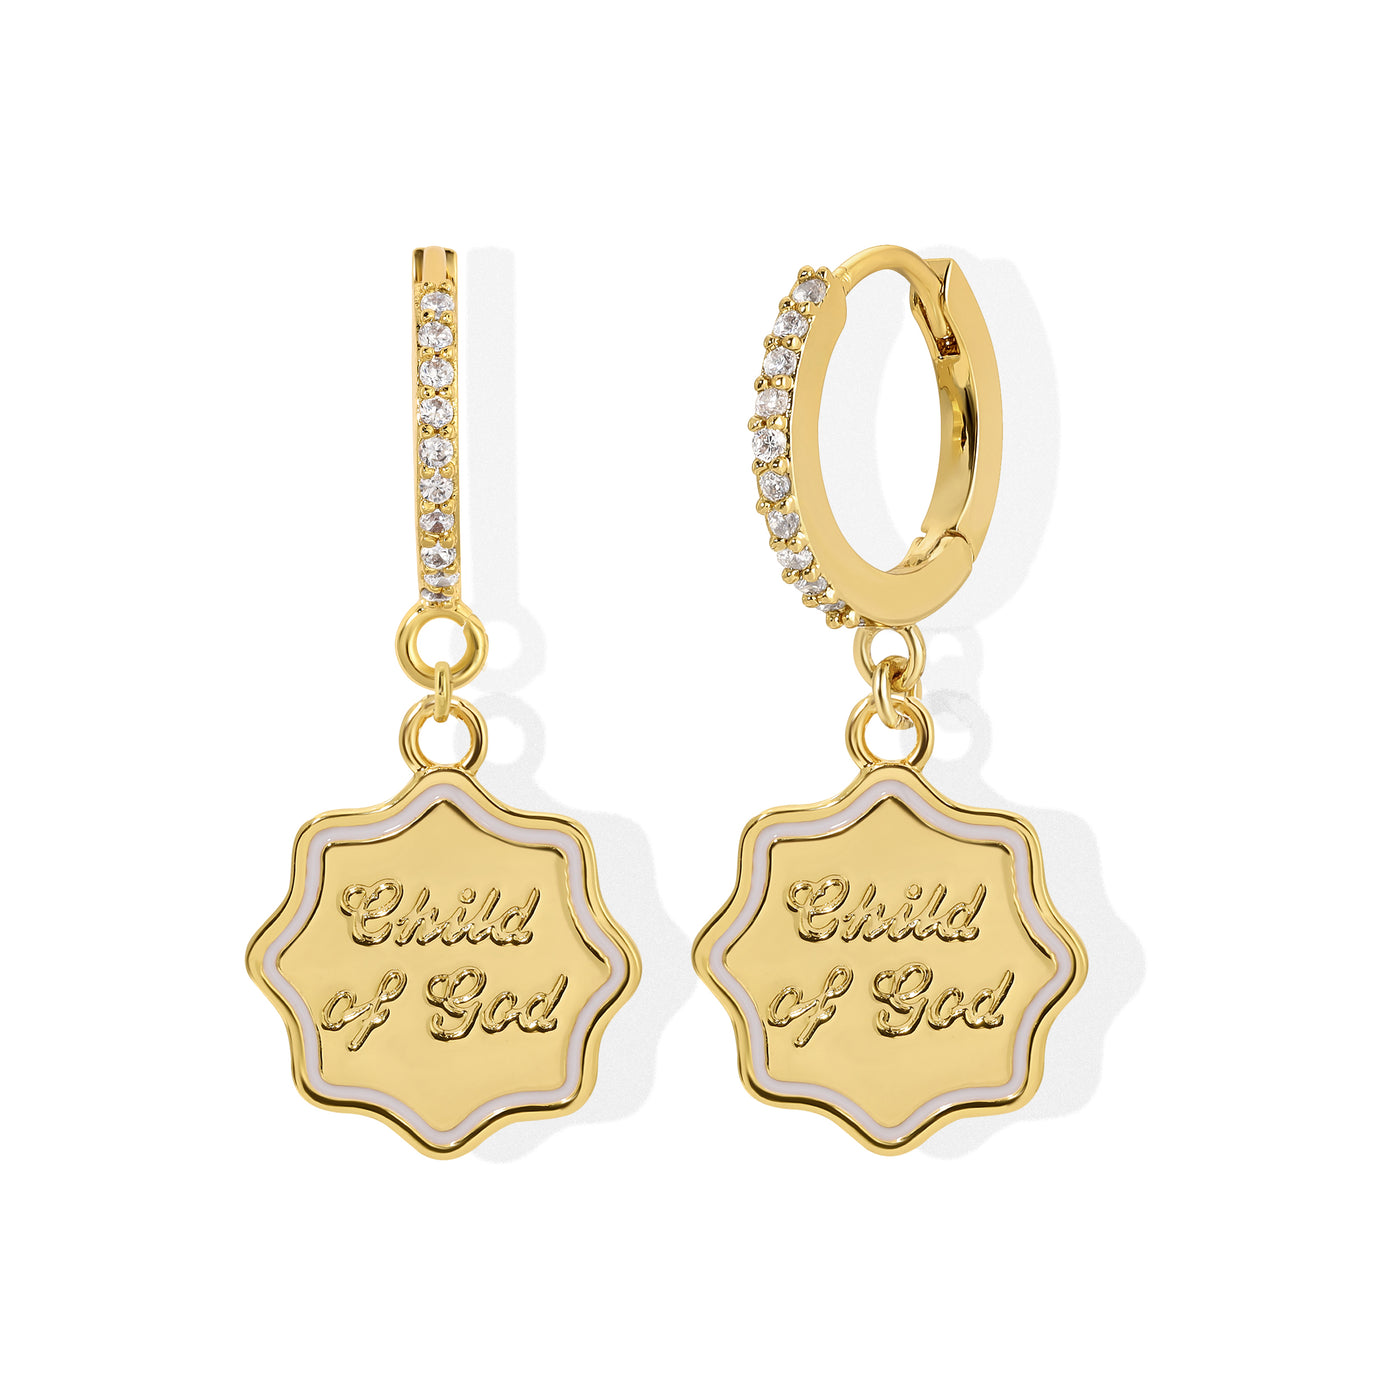 Child of God Pave Earrings